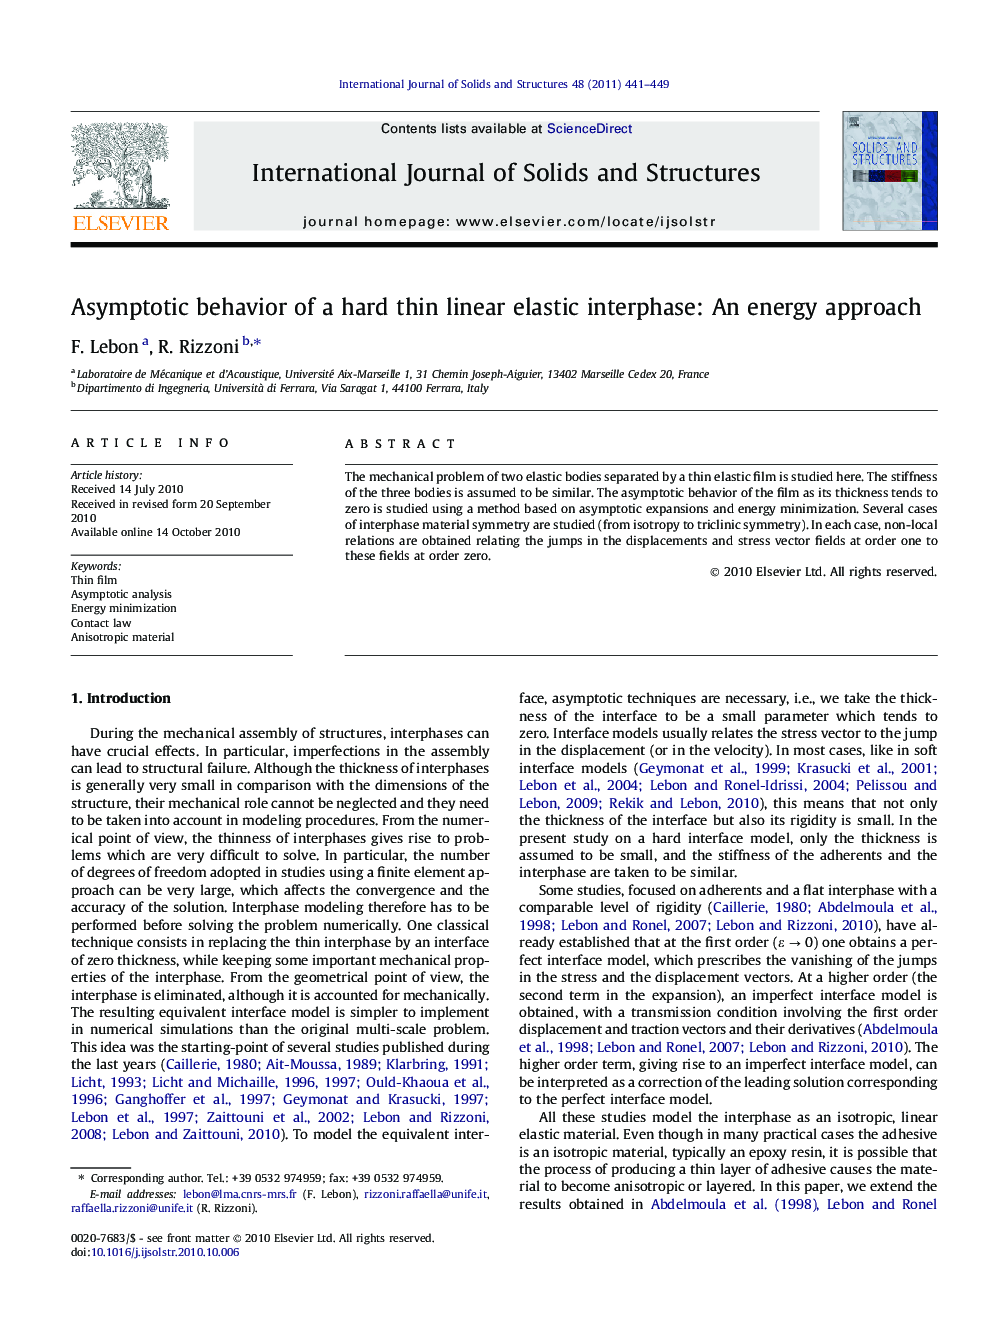 Asymptotic behavior of a hard thin linear elastic interphase: An energy approach